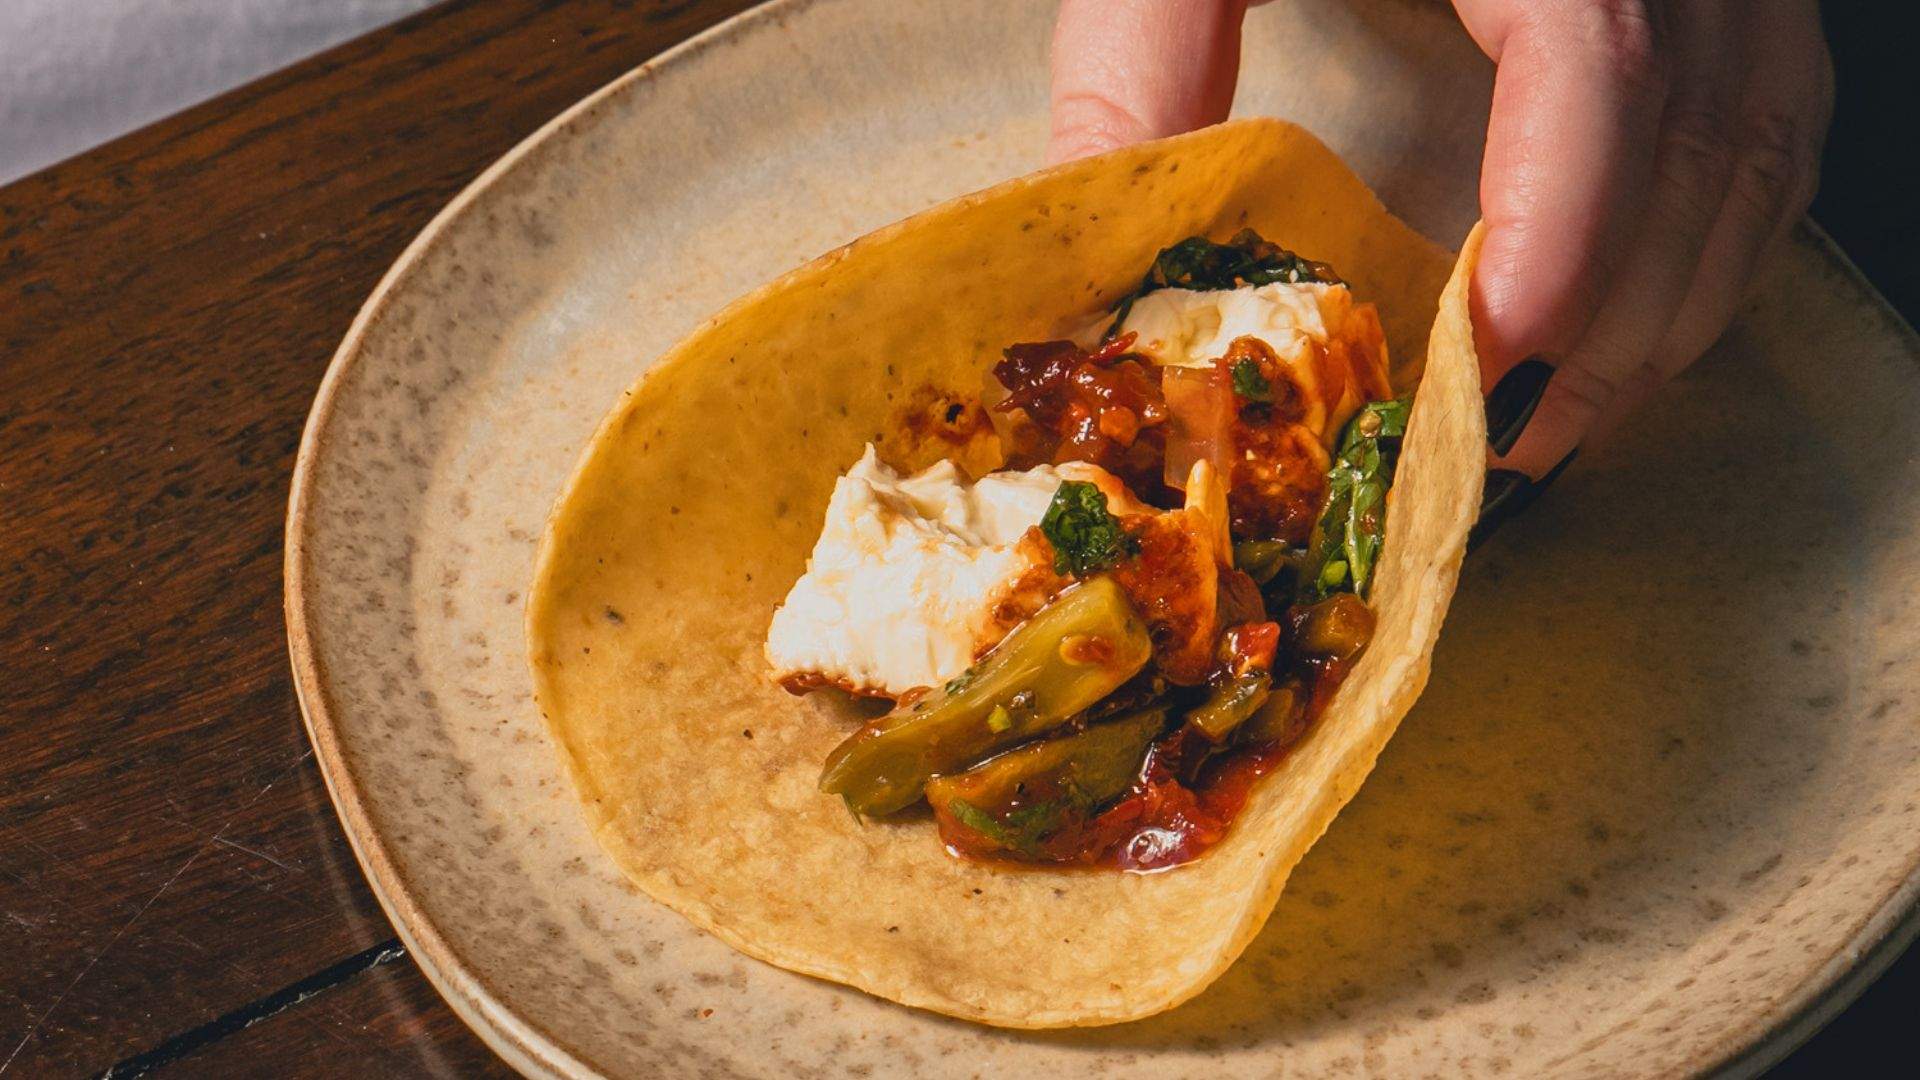 Good Times Abound with the Arrival of Comedor — a Love Letter to Mexican Cuisine in Newtown